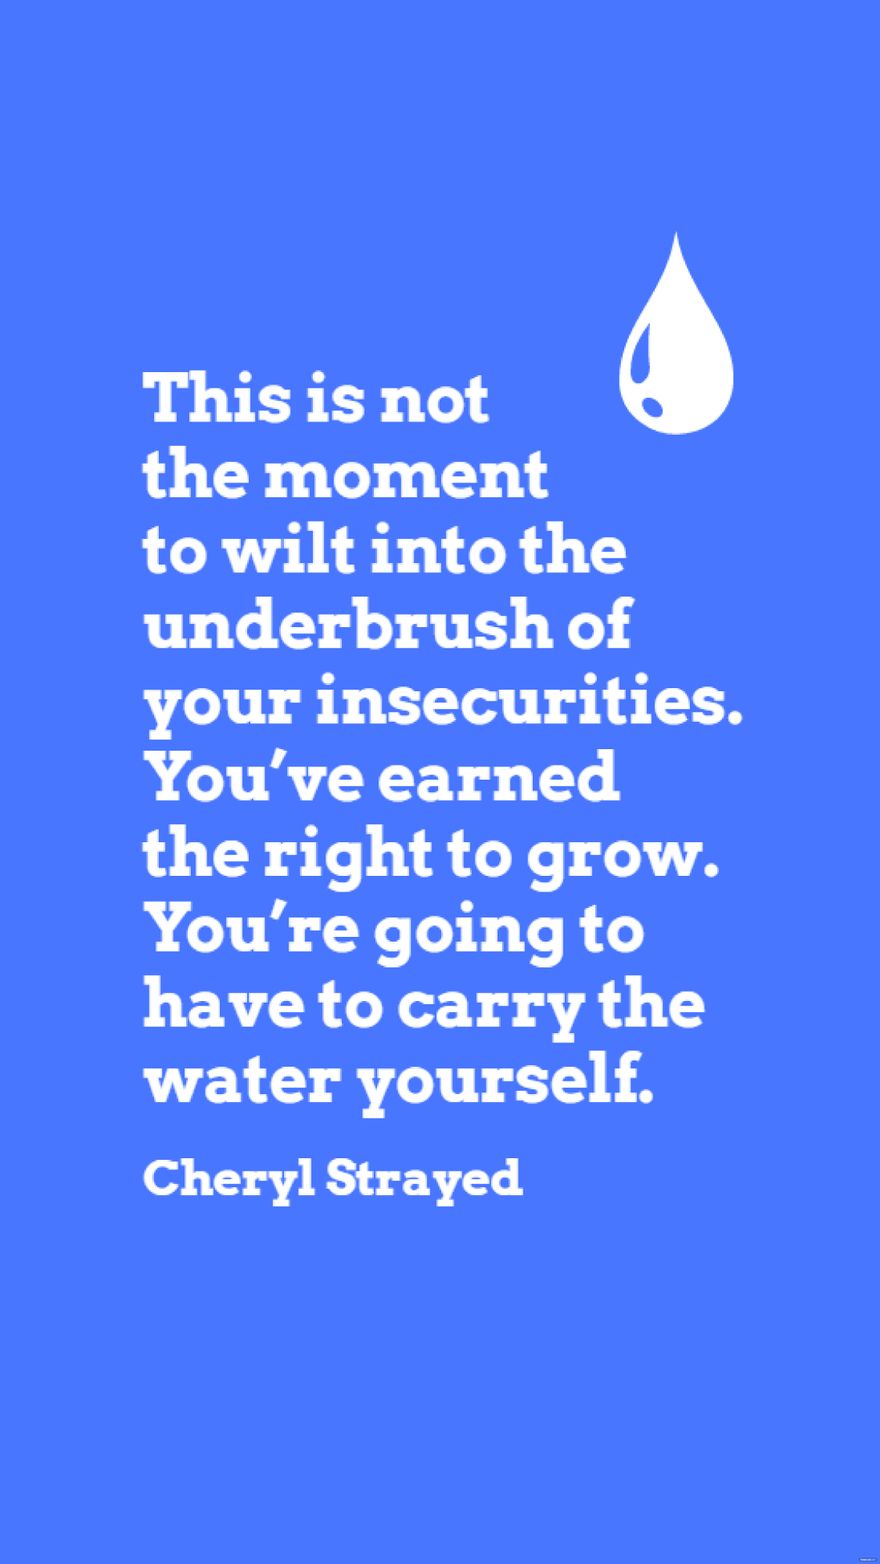 Free Cheryl Strayed - This is not the moment to wilt into the underbrush of your insecurities. You’ve earned the right to grow. You’re going to have to carry the water yourself. in JPG